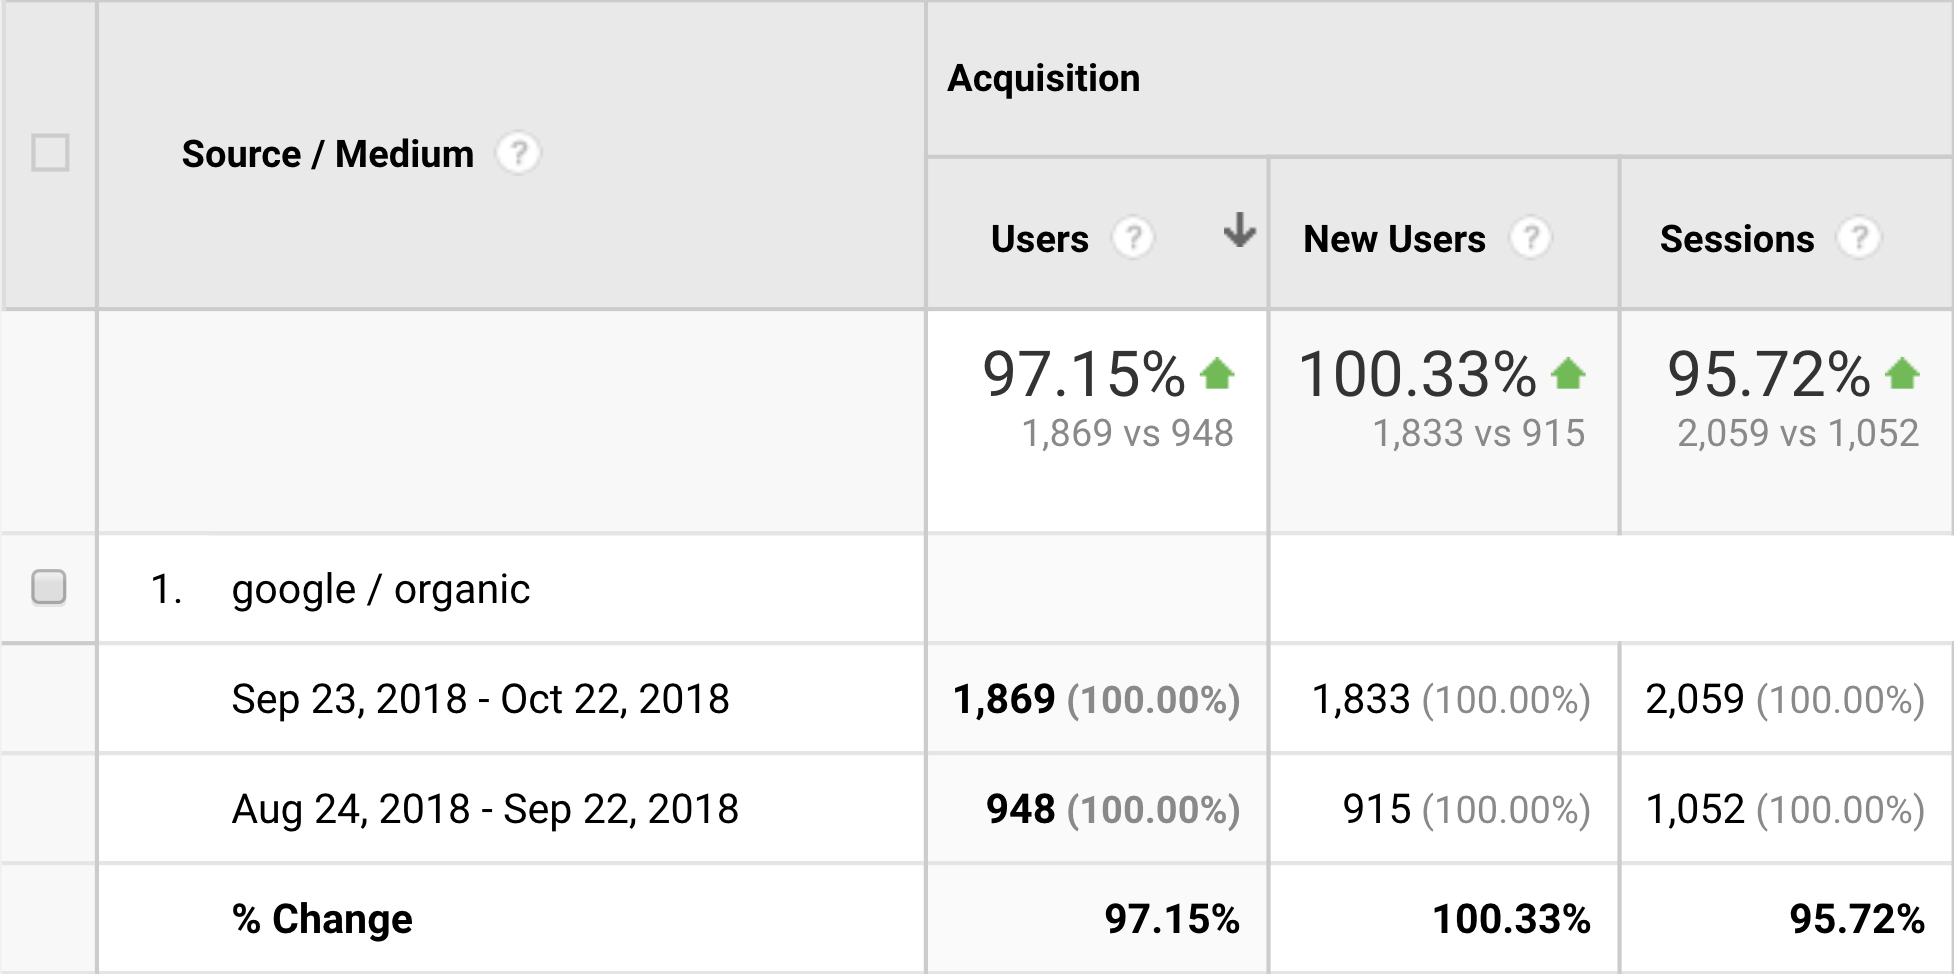  /></p>
<p>These results are something that is very achievable, don’t let yourself think these are some crazy numbers, this is completely doable. If you are new to the SEO scene, this is not that uncommon.</p>
<p><strong>My 3 Step Process</strong></p>
<p>In order to combat the common confusion with learning SEO, I created my own 3 step process that is so easy, beginners leave this course feeling fully equipped to battle the SEO monster.</p>
<p>This course is what I would have asked for, over 6 years ago, when I started this whole journey…</p>
<p><strong>Get <a href=